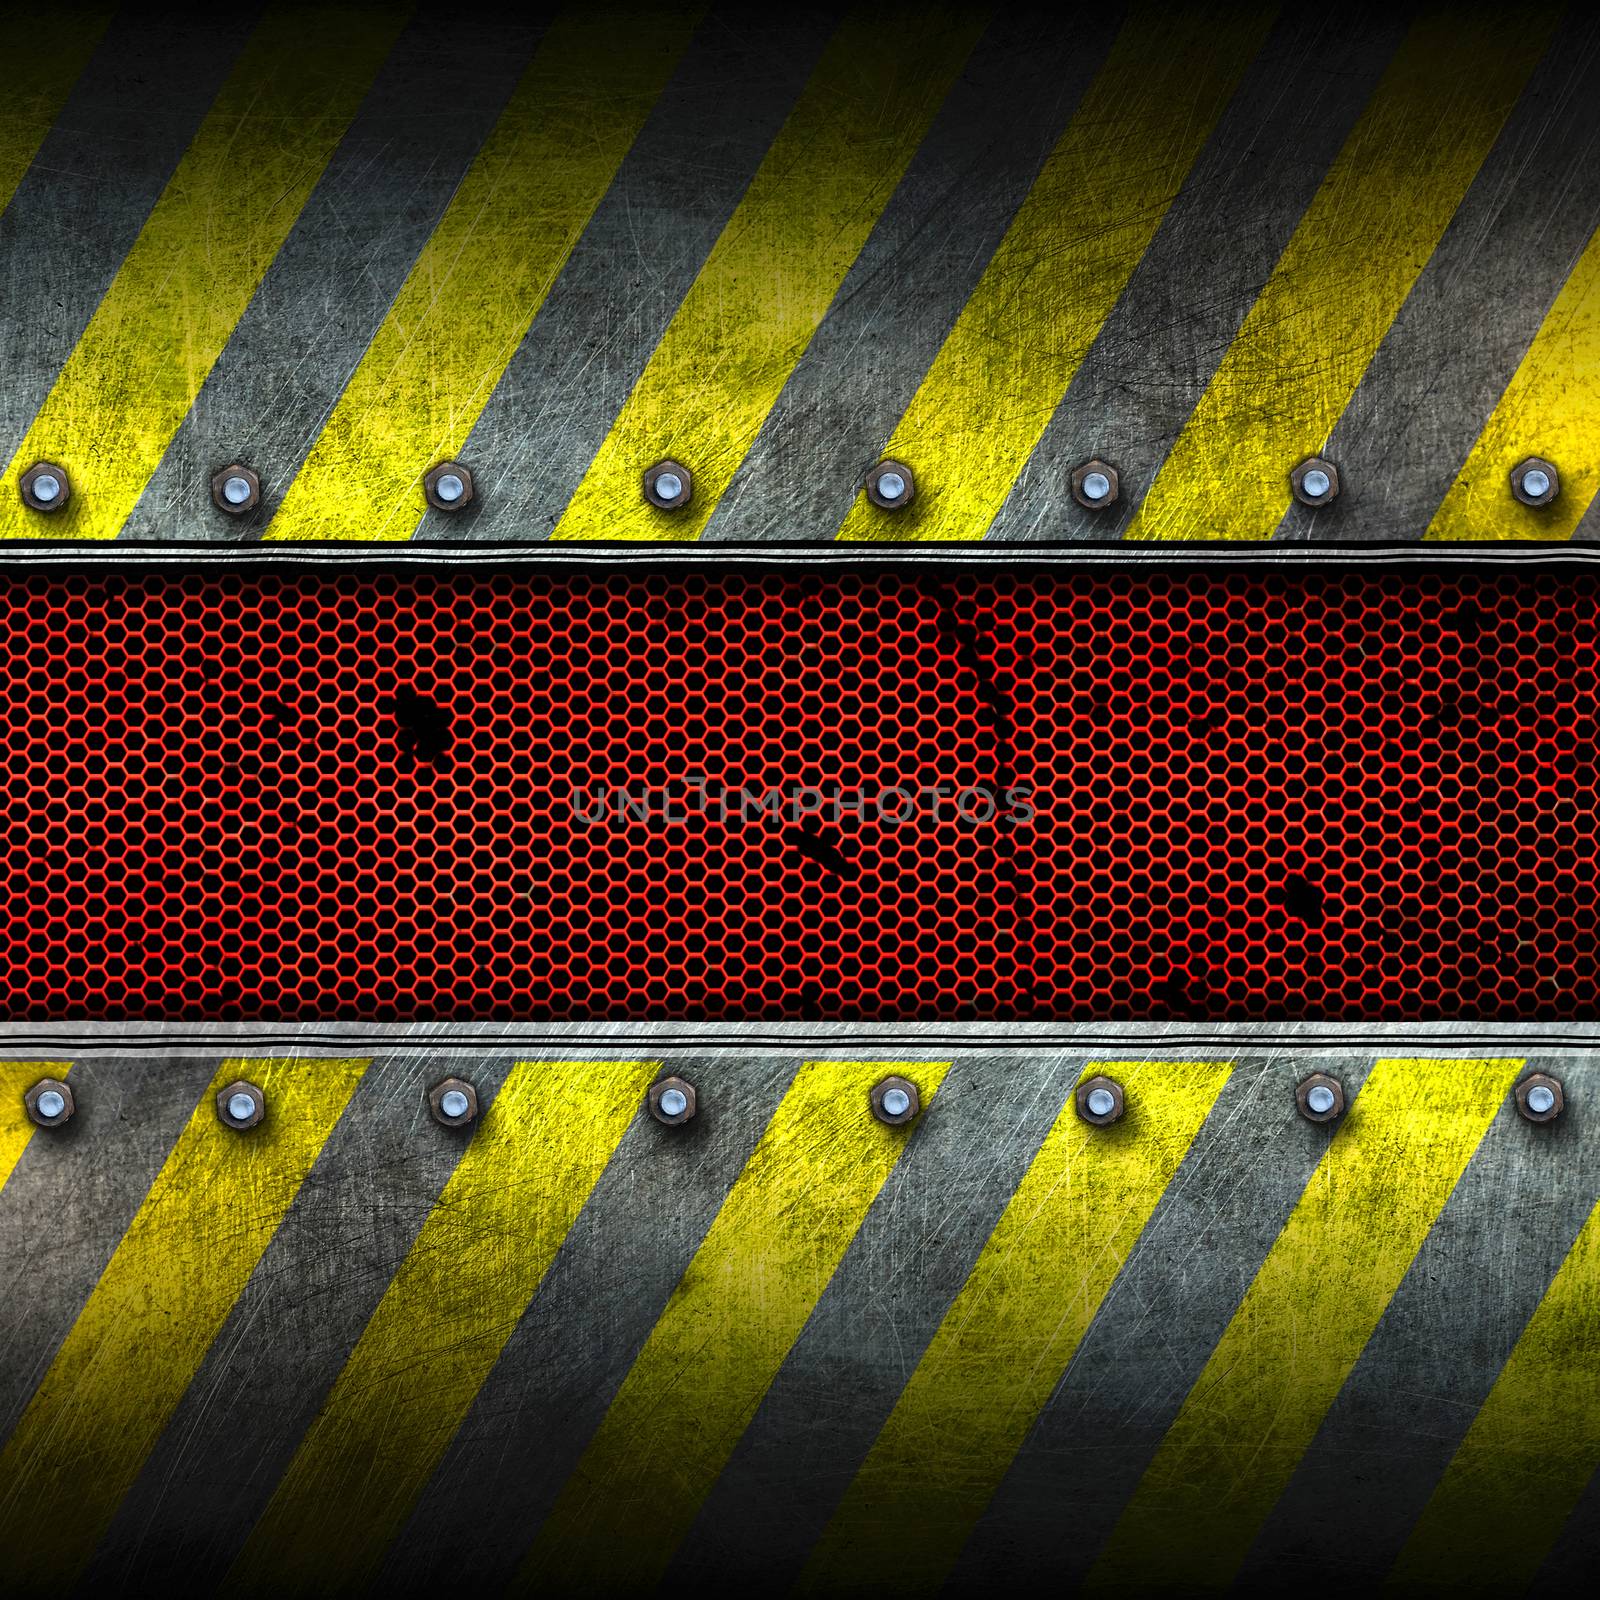 grunge metal and red mesh with yellow painted. safety zone. 3d illustration. background and texture.